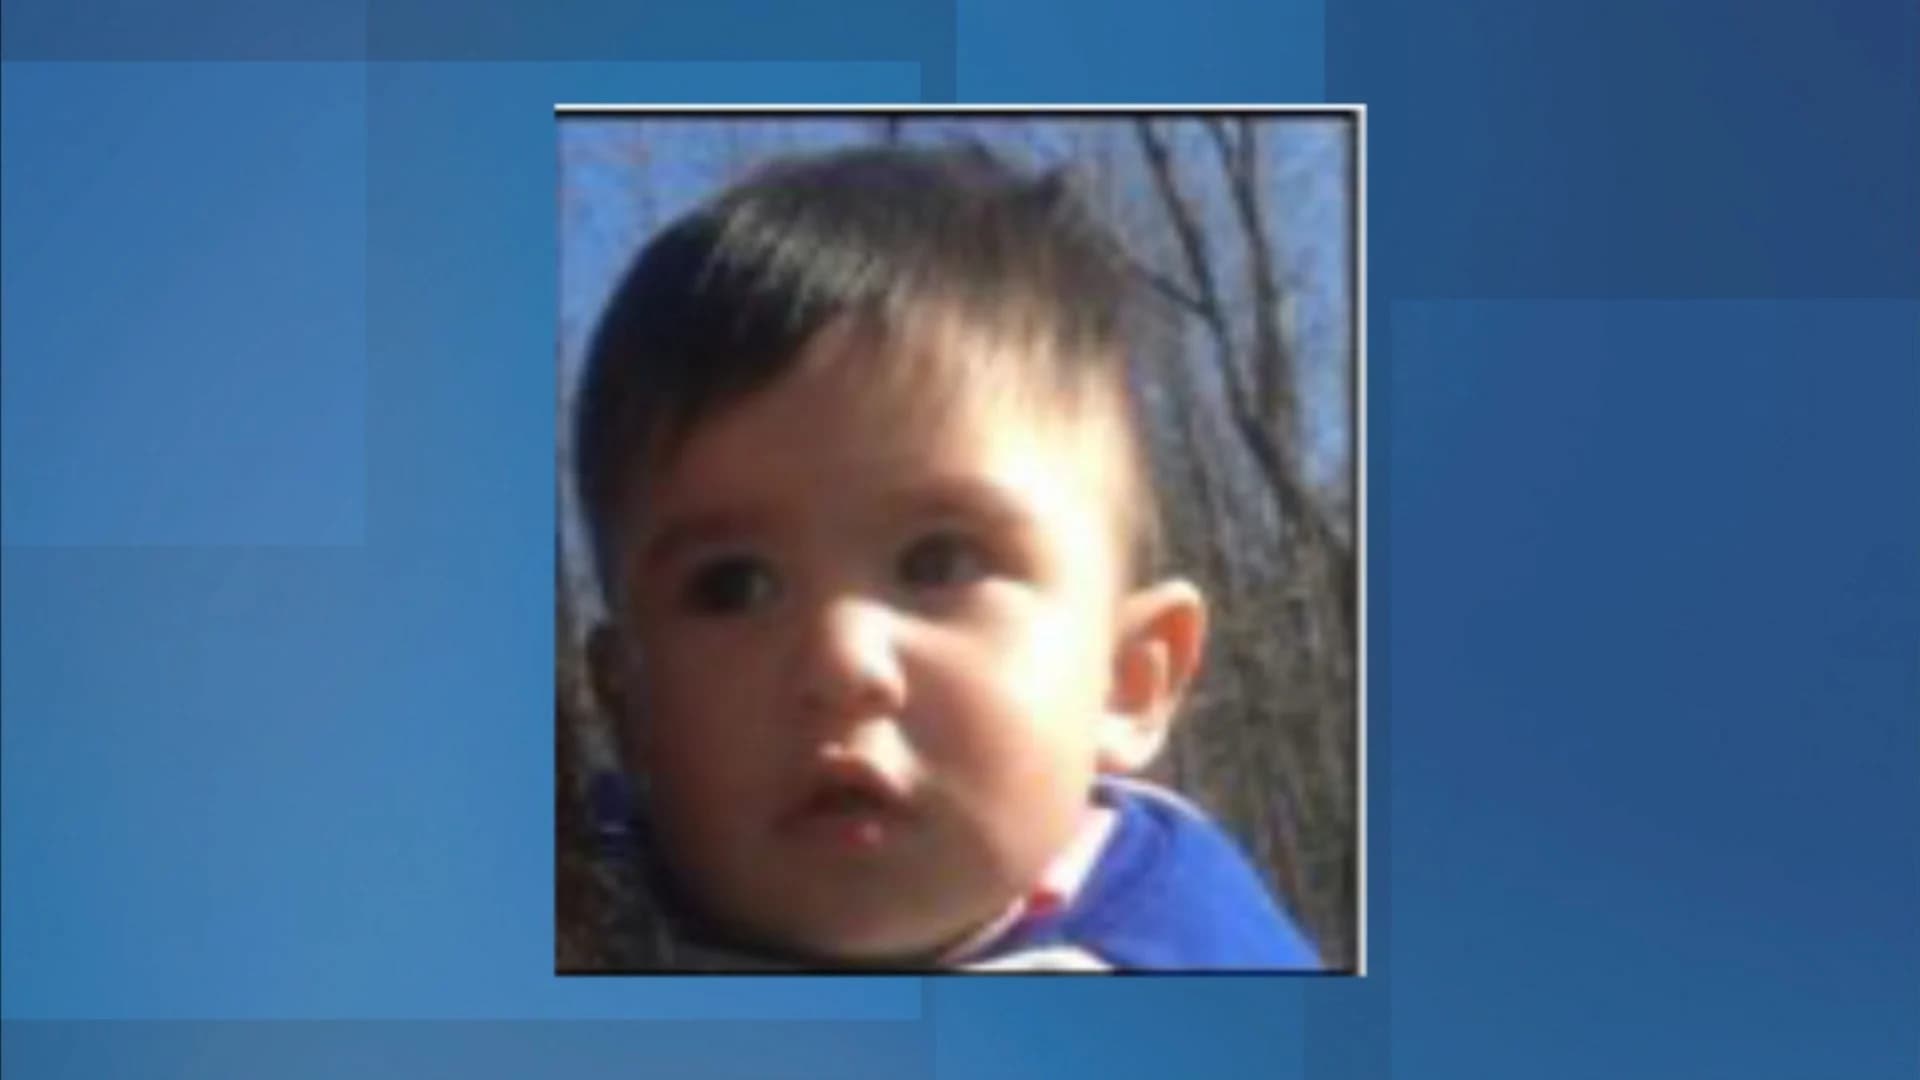 Search on for missing NY toddler after mother's body found